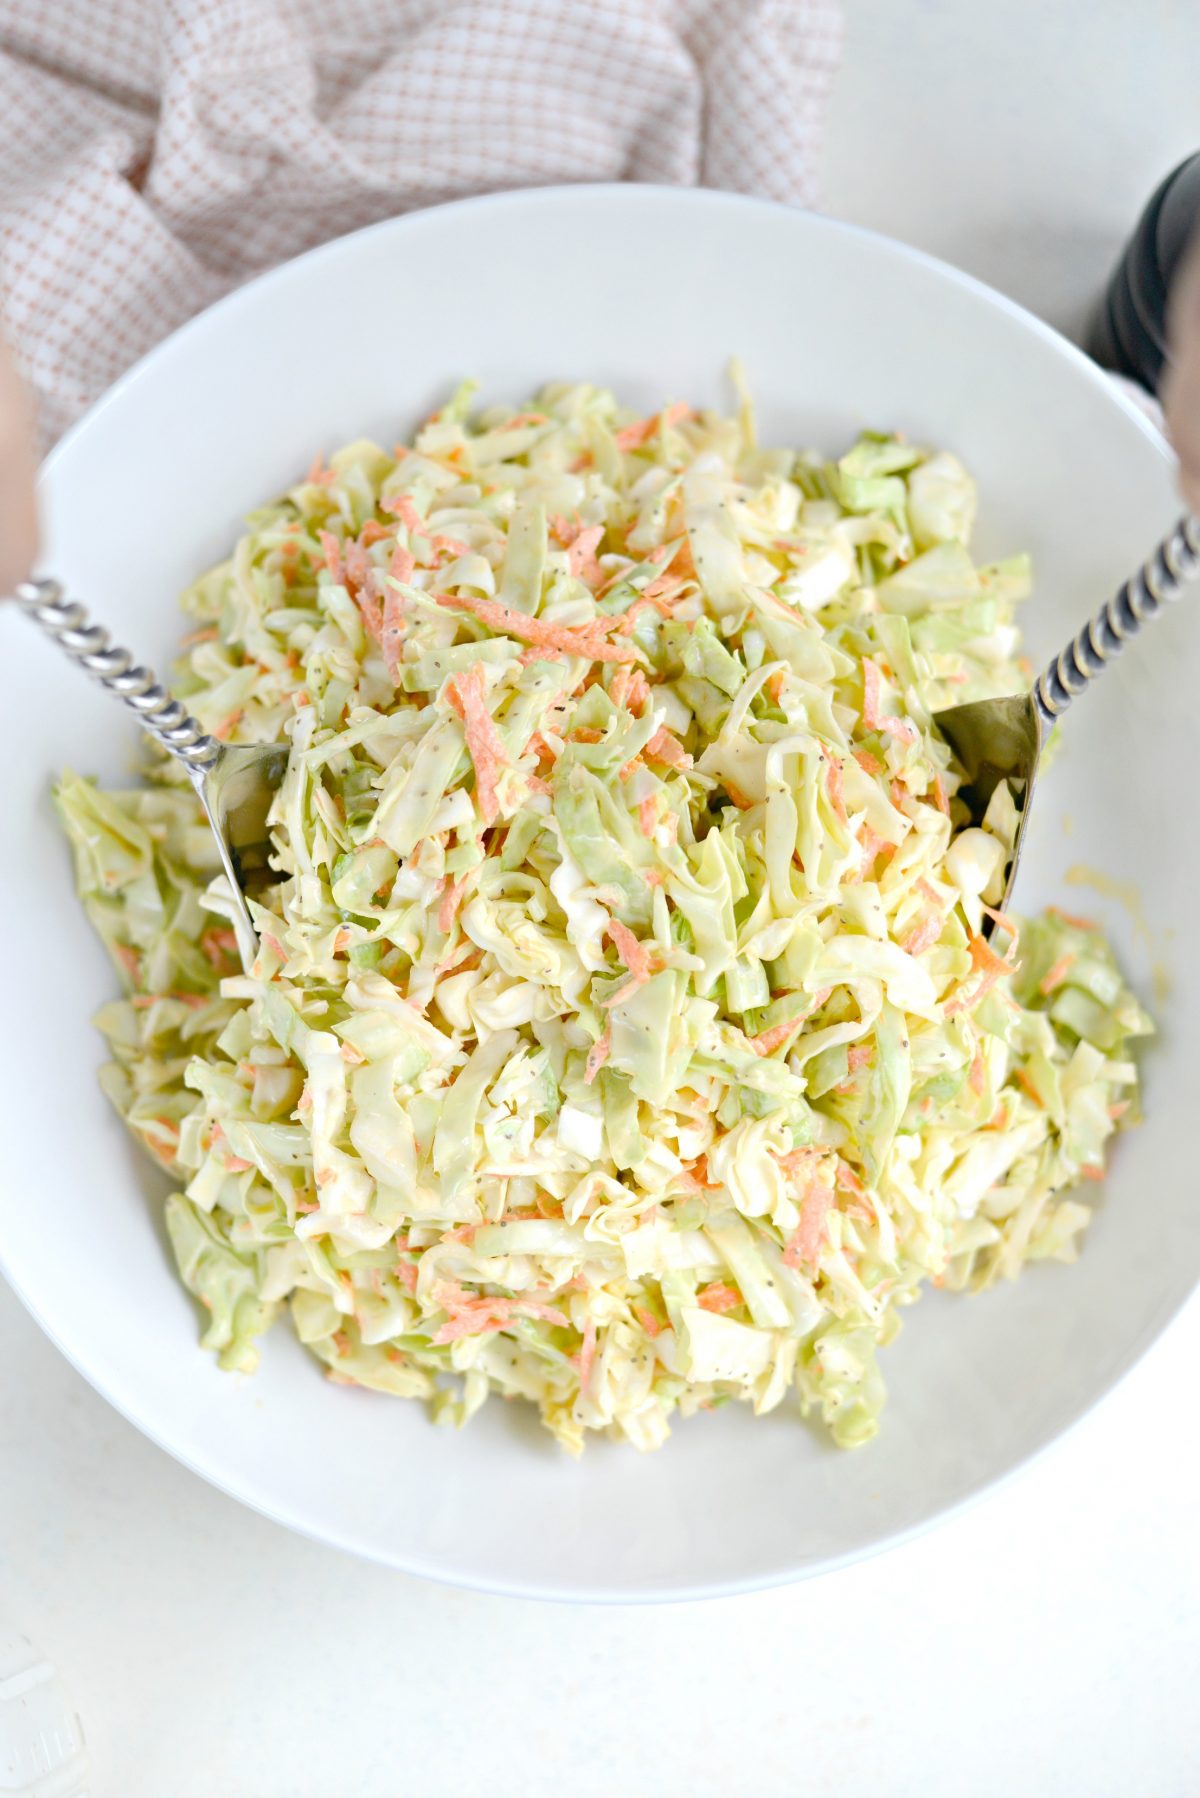 Classic Coleslaw Recipe with Homemade Dressing l SimplyScratch.com (13)